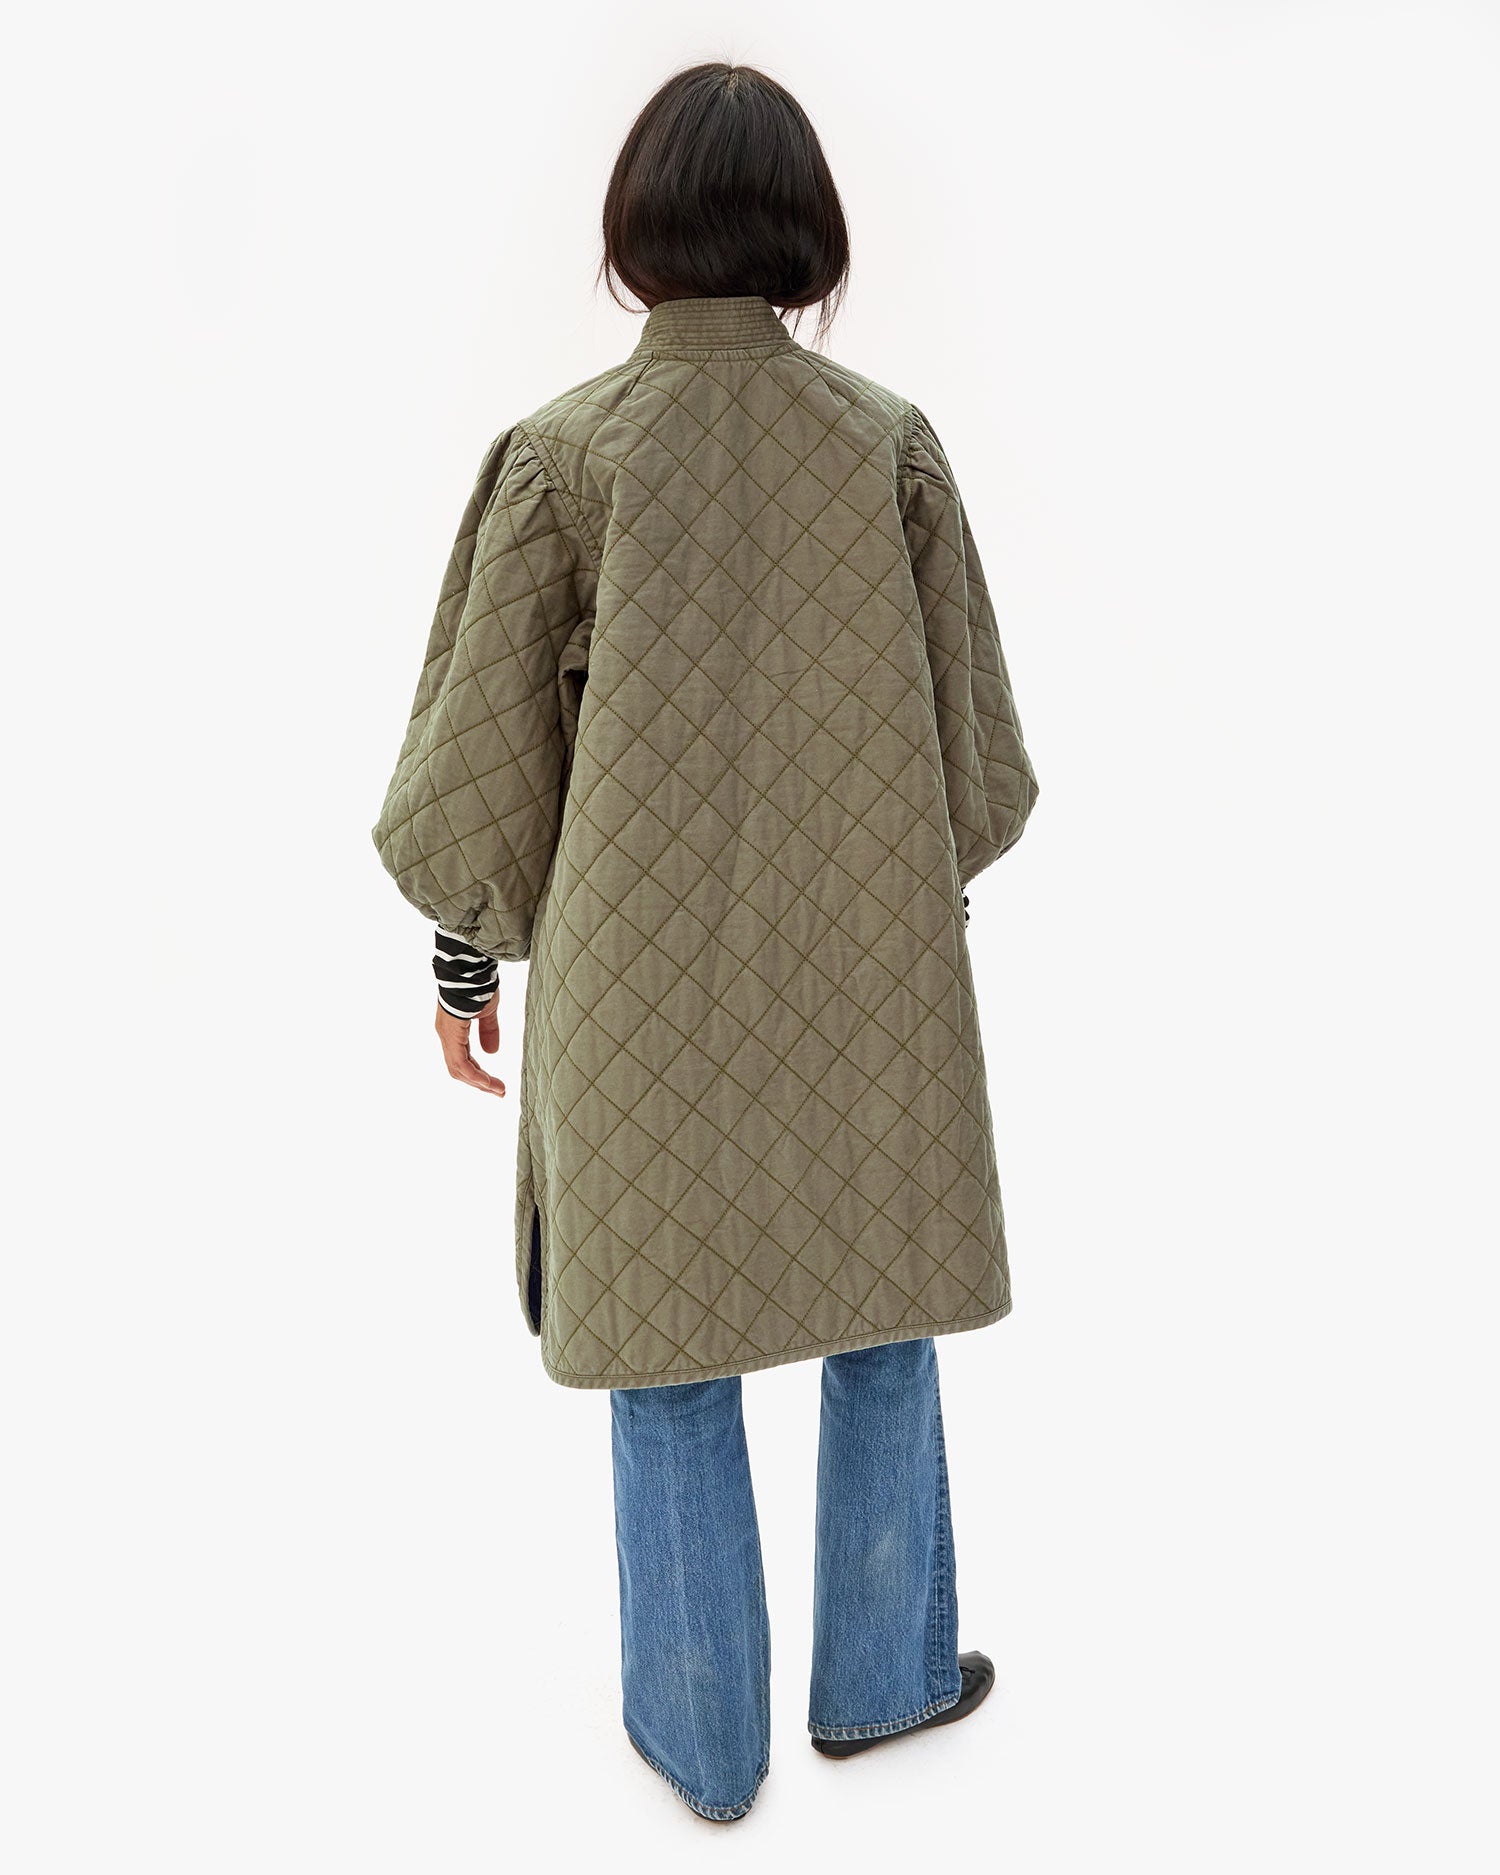 Back of Maly wearing the Olive Quilted Clemence Car Coat.